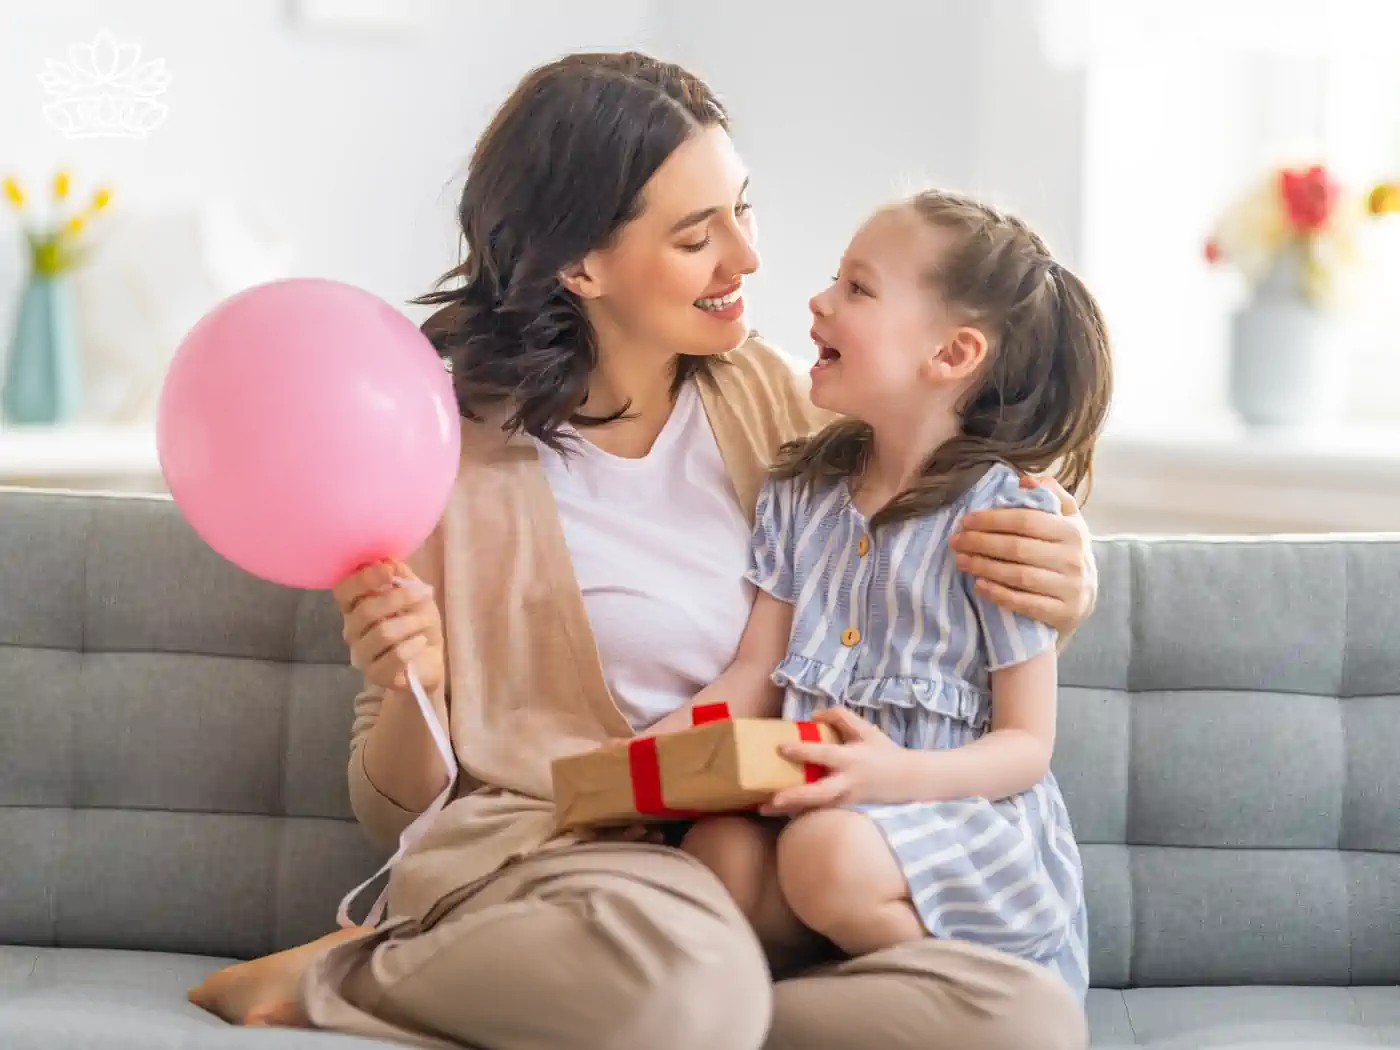 Mother and daughter sitting on a couch, holding a pink balloon and a gift box. Fabulous Flowers and Gifts. Collection: Women's Day.